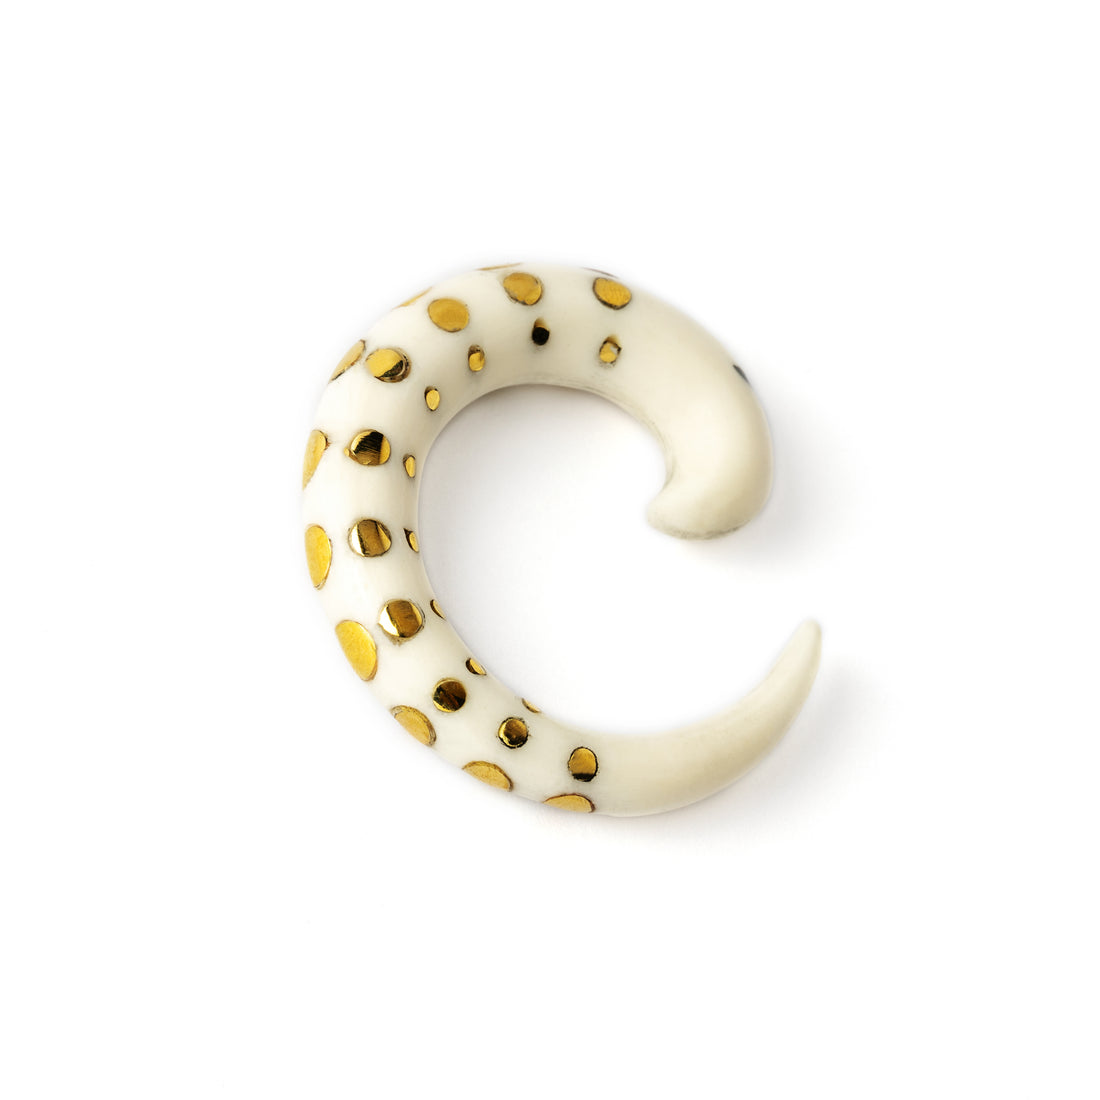 white bone taper ear stretcher with golden dots left side back view